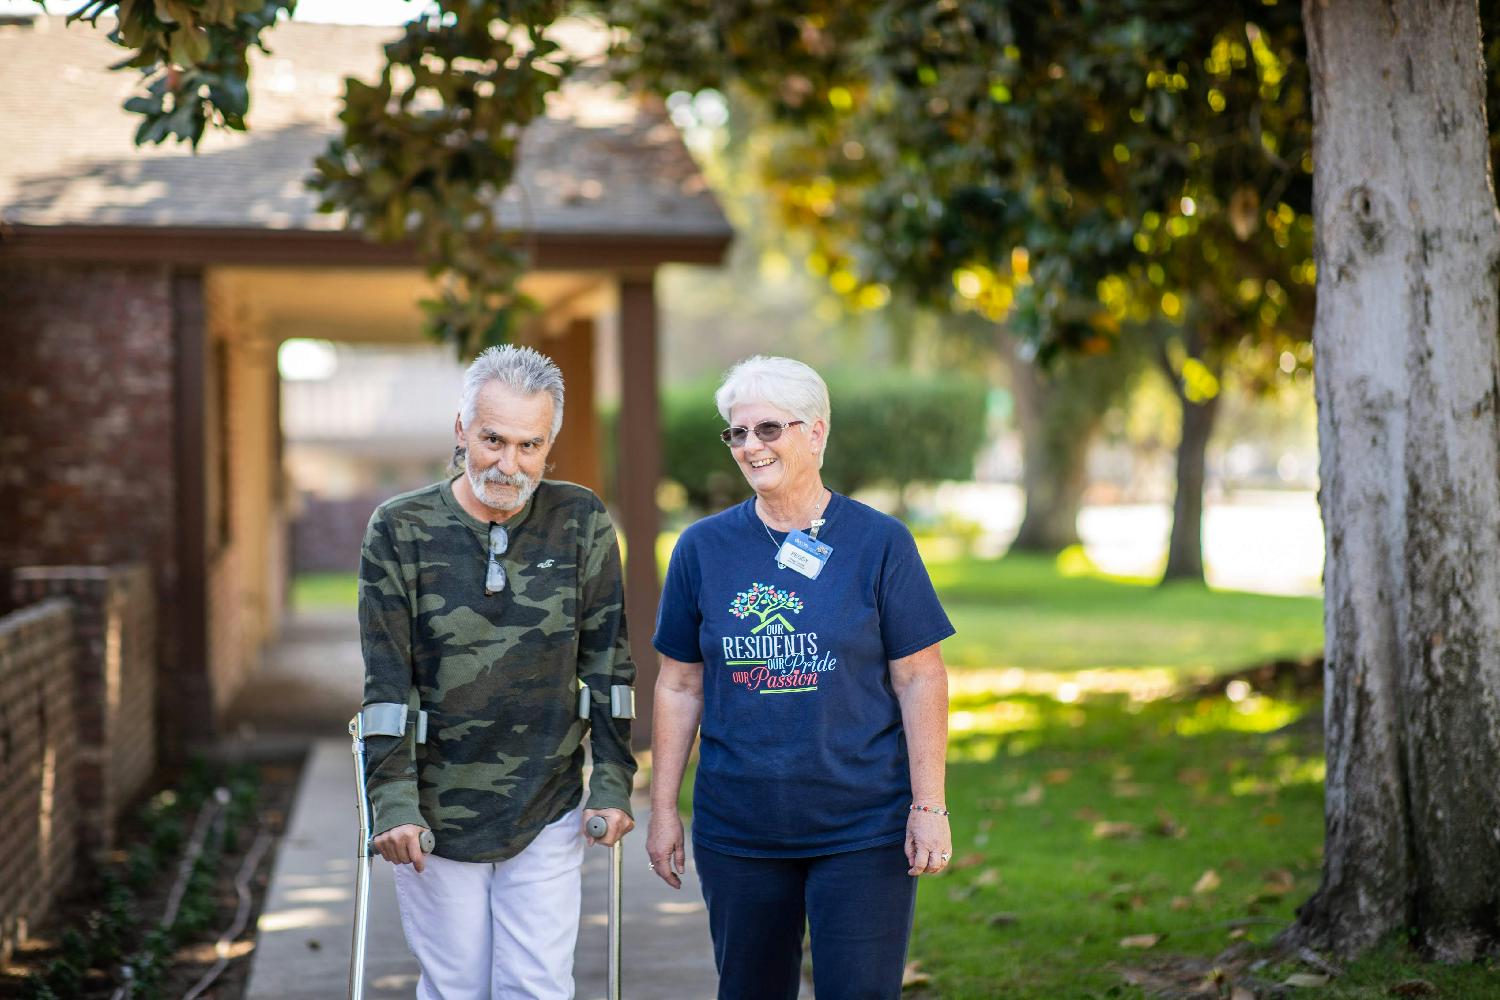 Eduro Healthcare employee escorts a patient outside after successful rehab treatments.